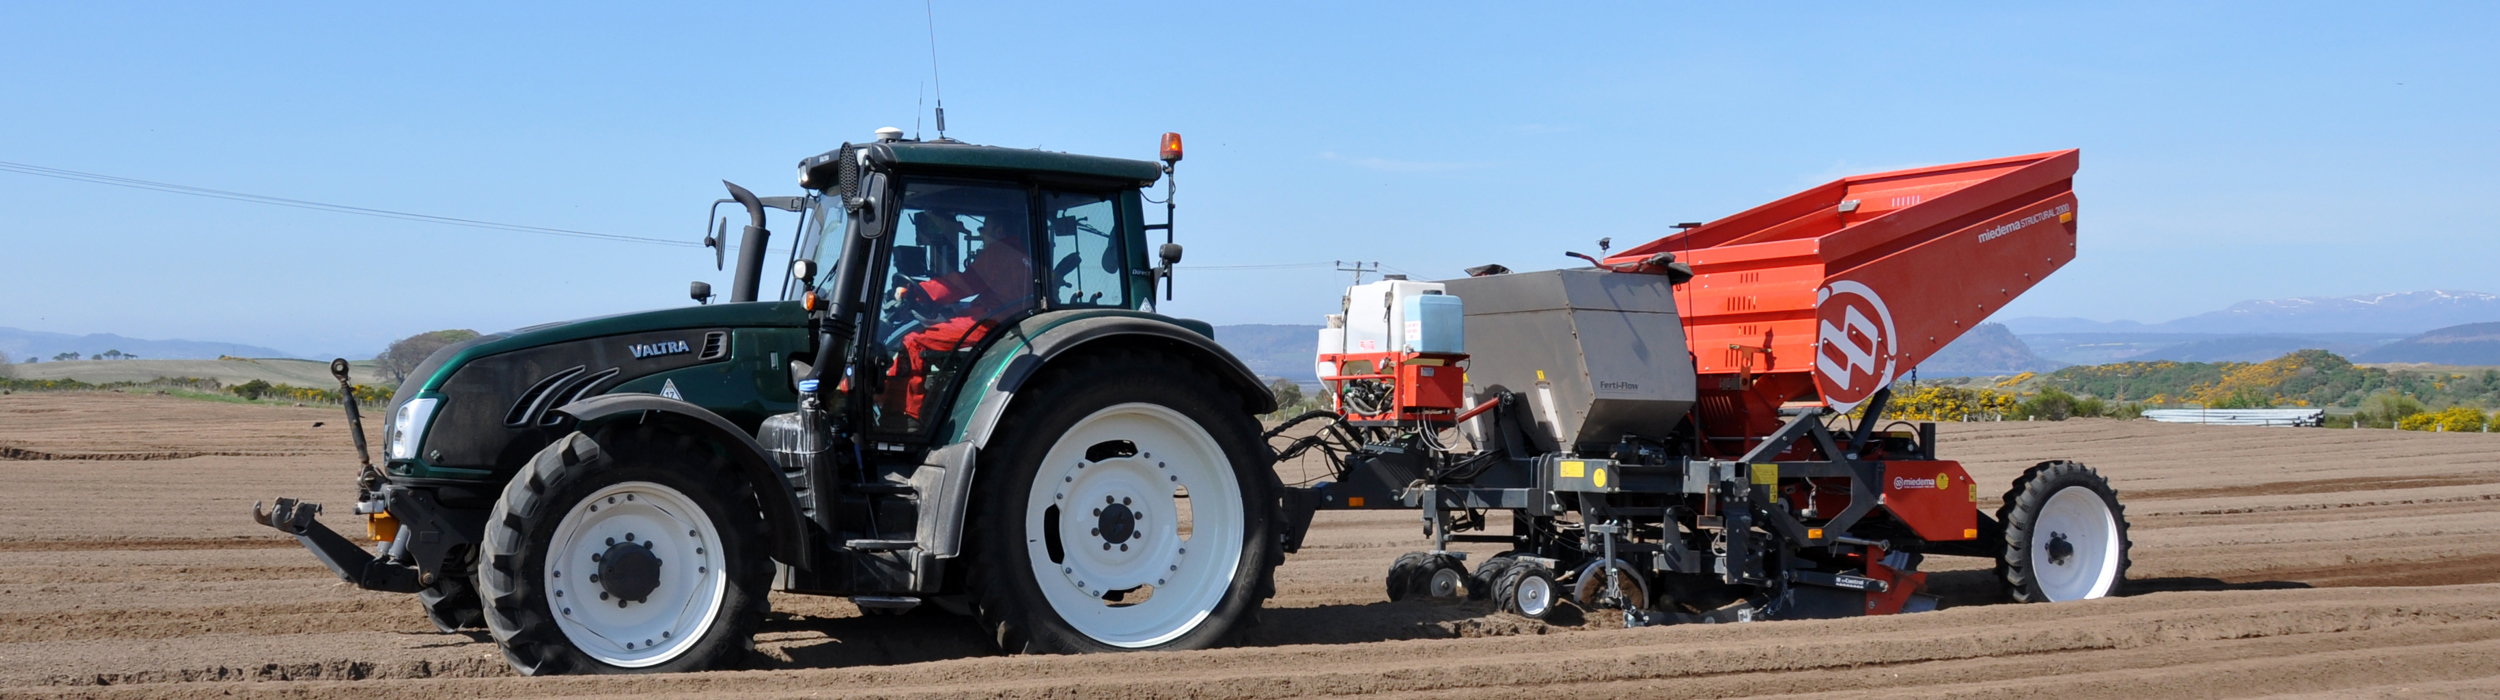 Mounted or trailed 2-row belt planter